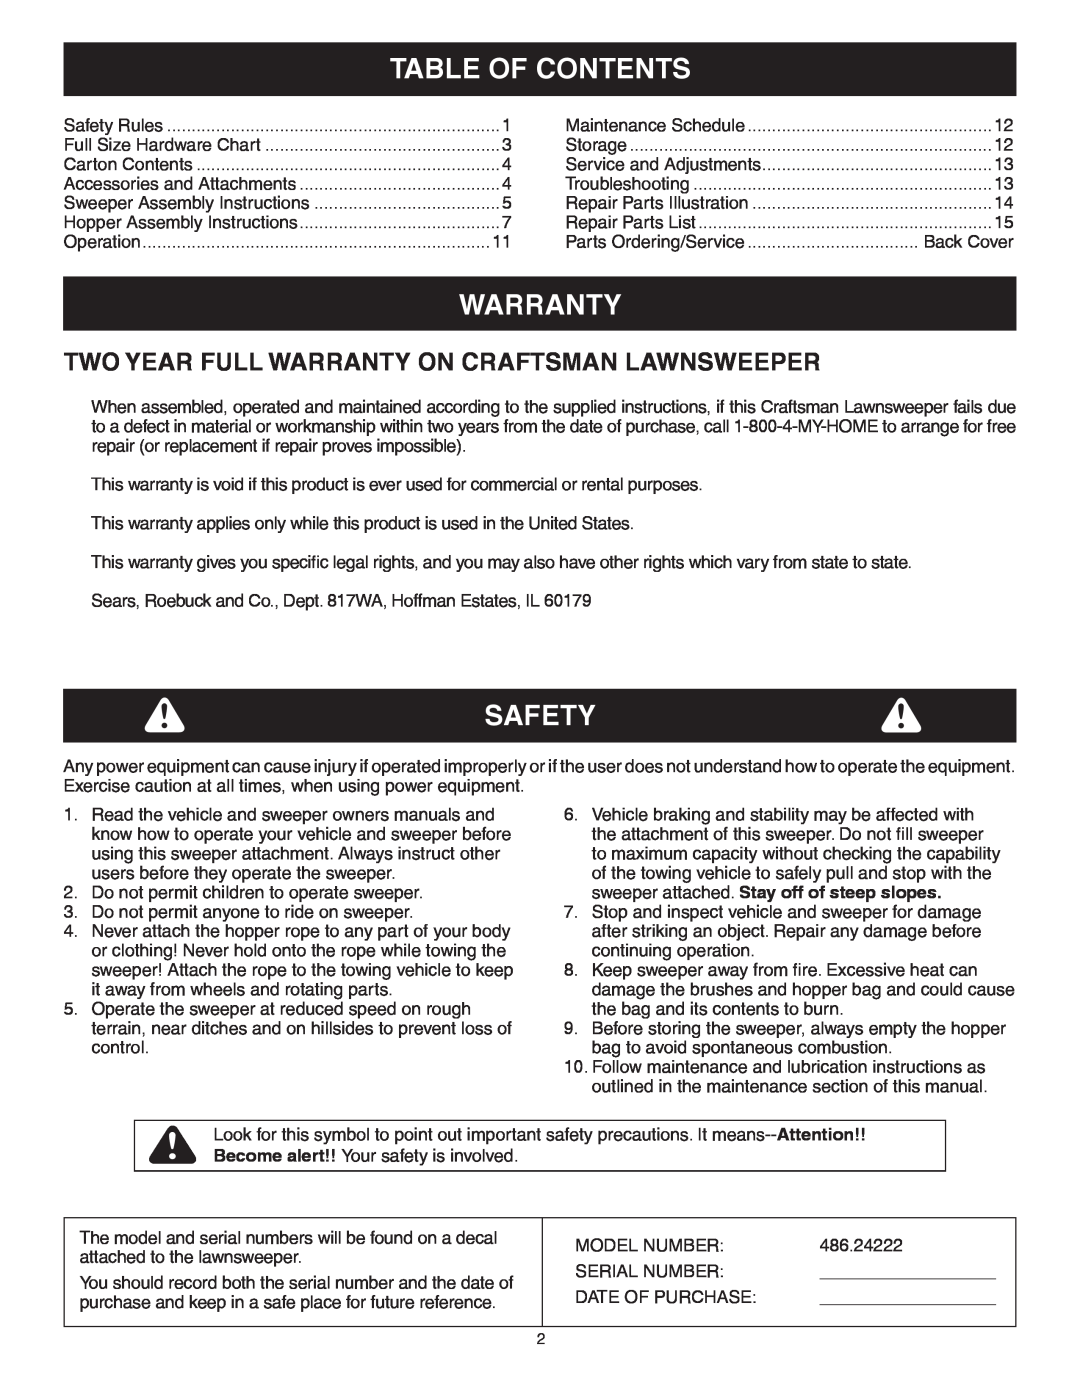 Craftsman 486.24222 owner manual Table Of Contents, Safety, Two Year Full Warranty On Craftsman Lawnsweeper 